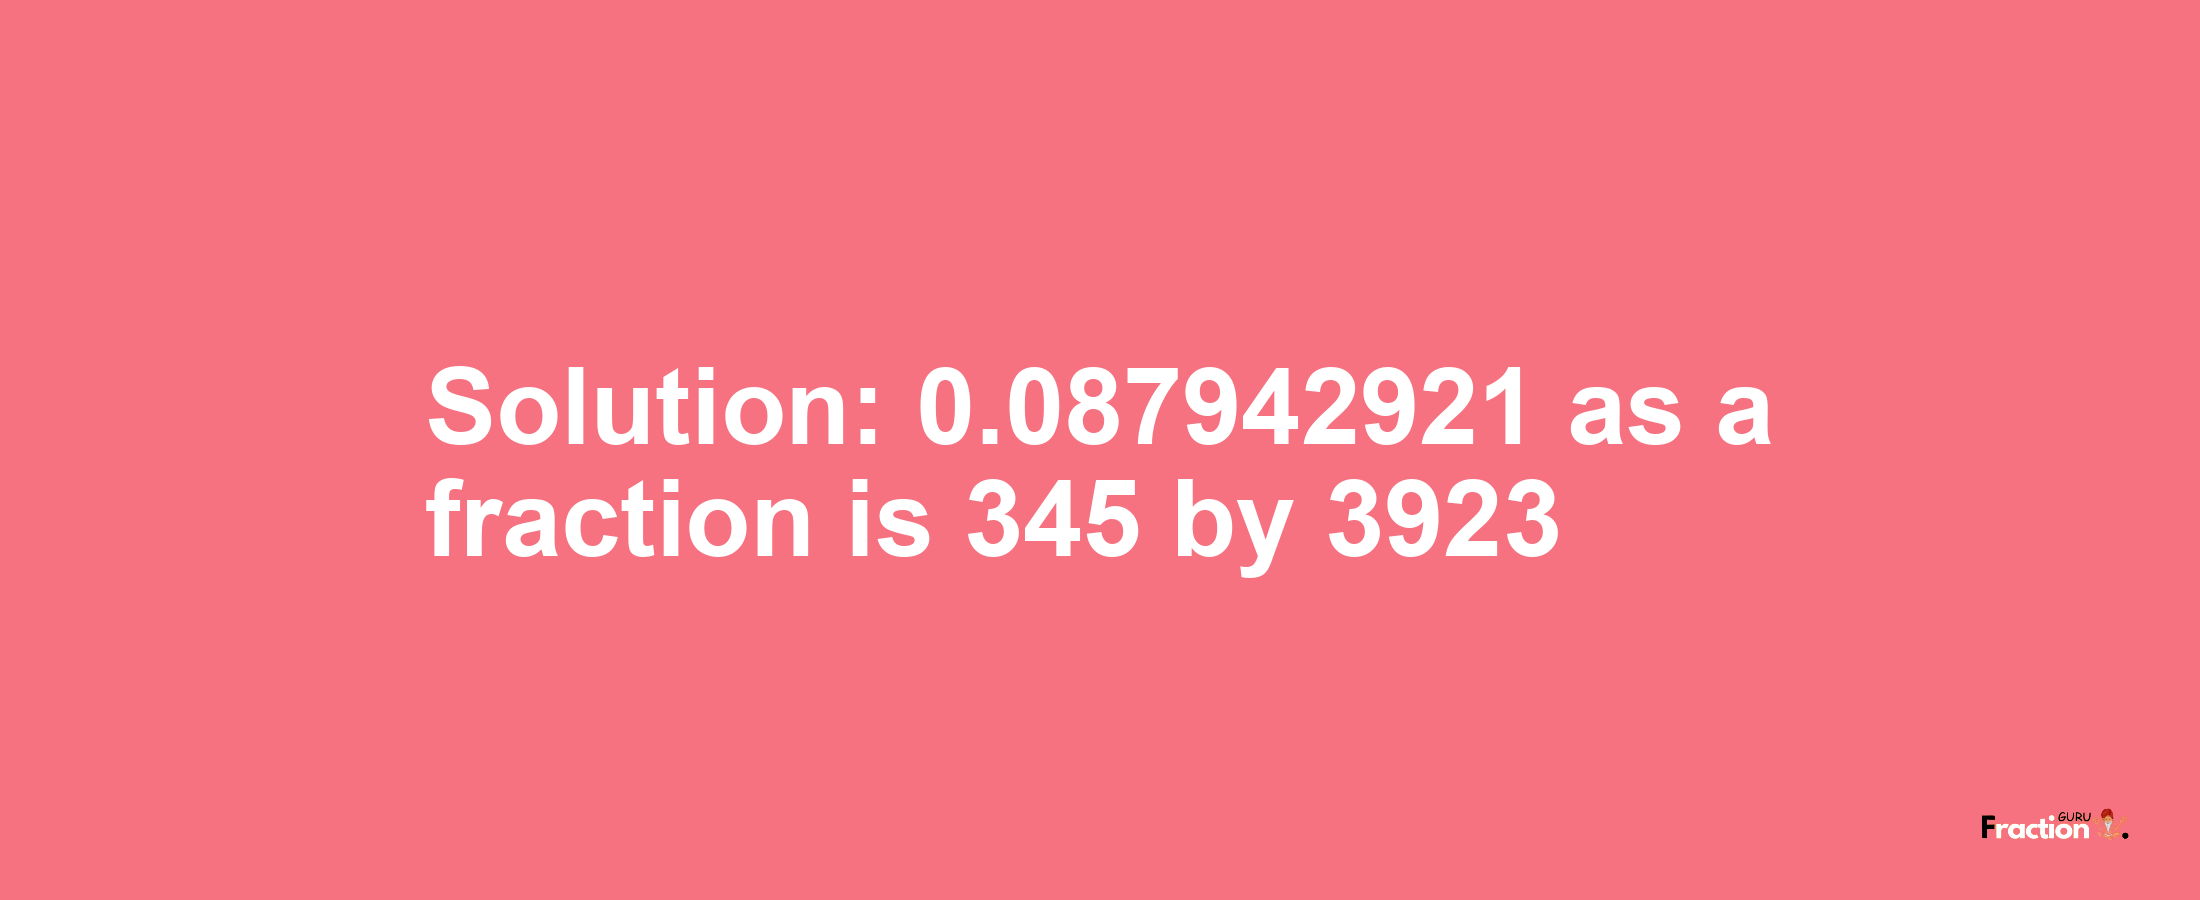 Solution:0.087942921 as a fraction is 345/3923